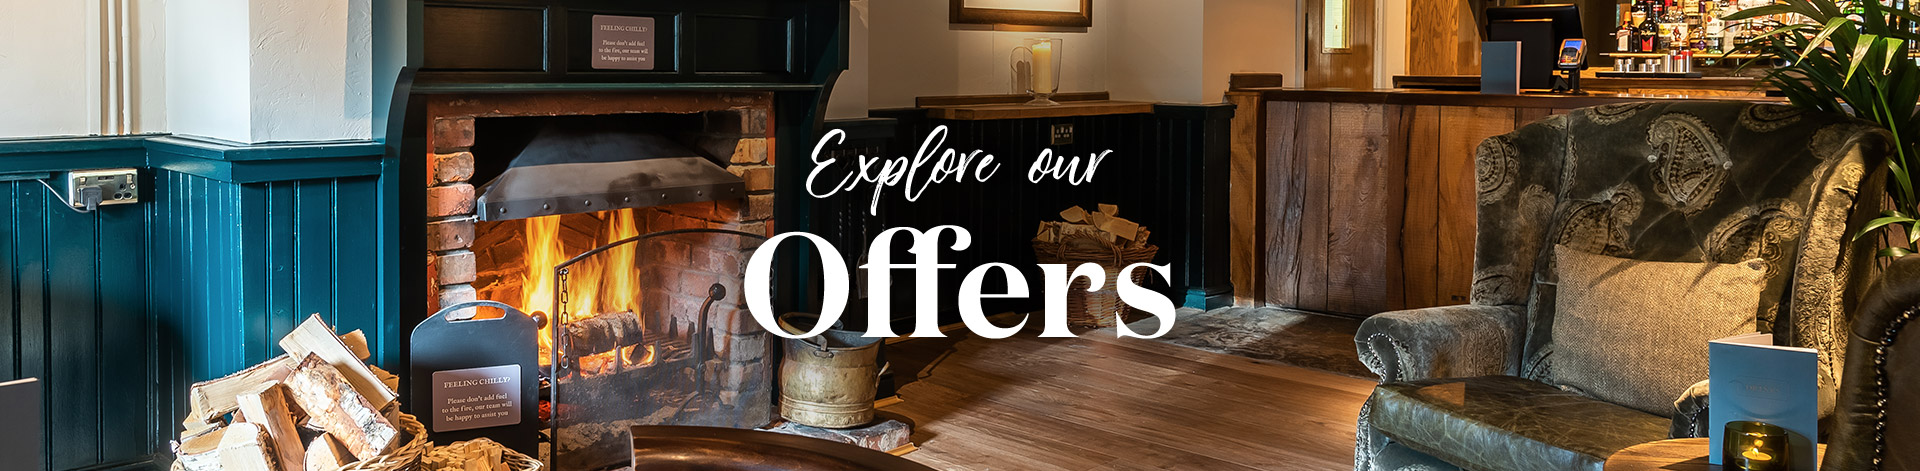 Our latest offers at The Shy Horse